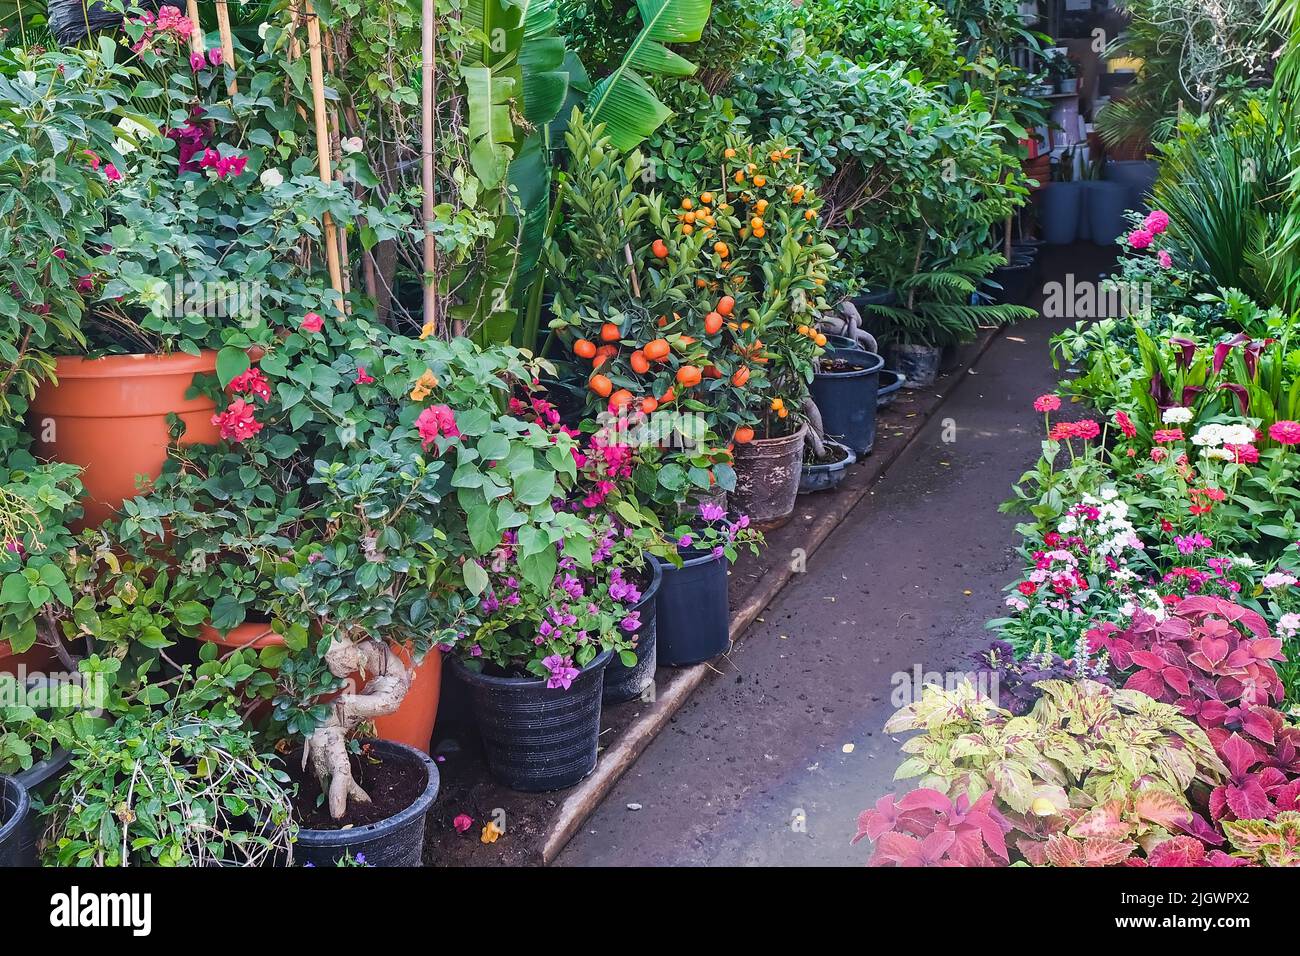 Abundance of different potted house plants and mini citrus trees with fruits in outdoor garden center store for retail and wholesale. Stock Photo